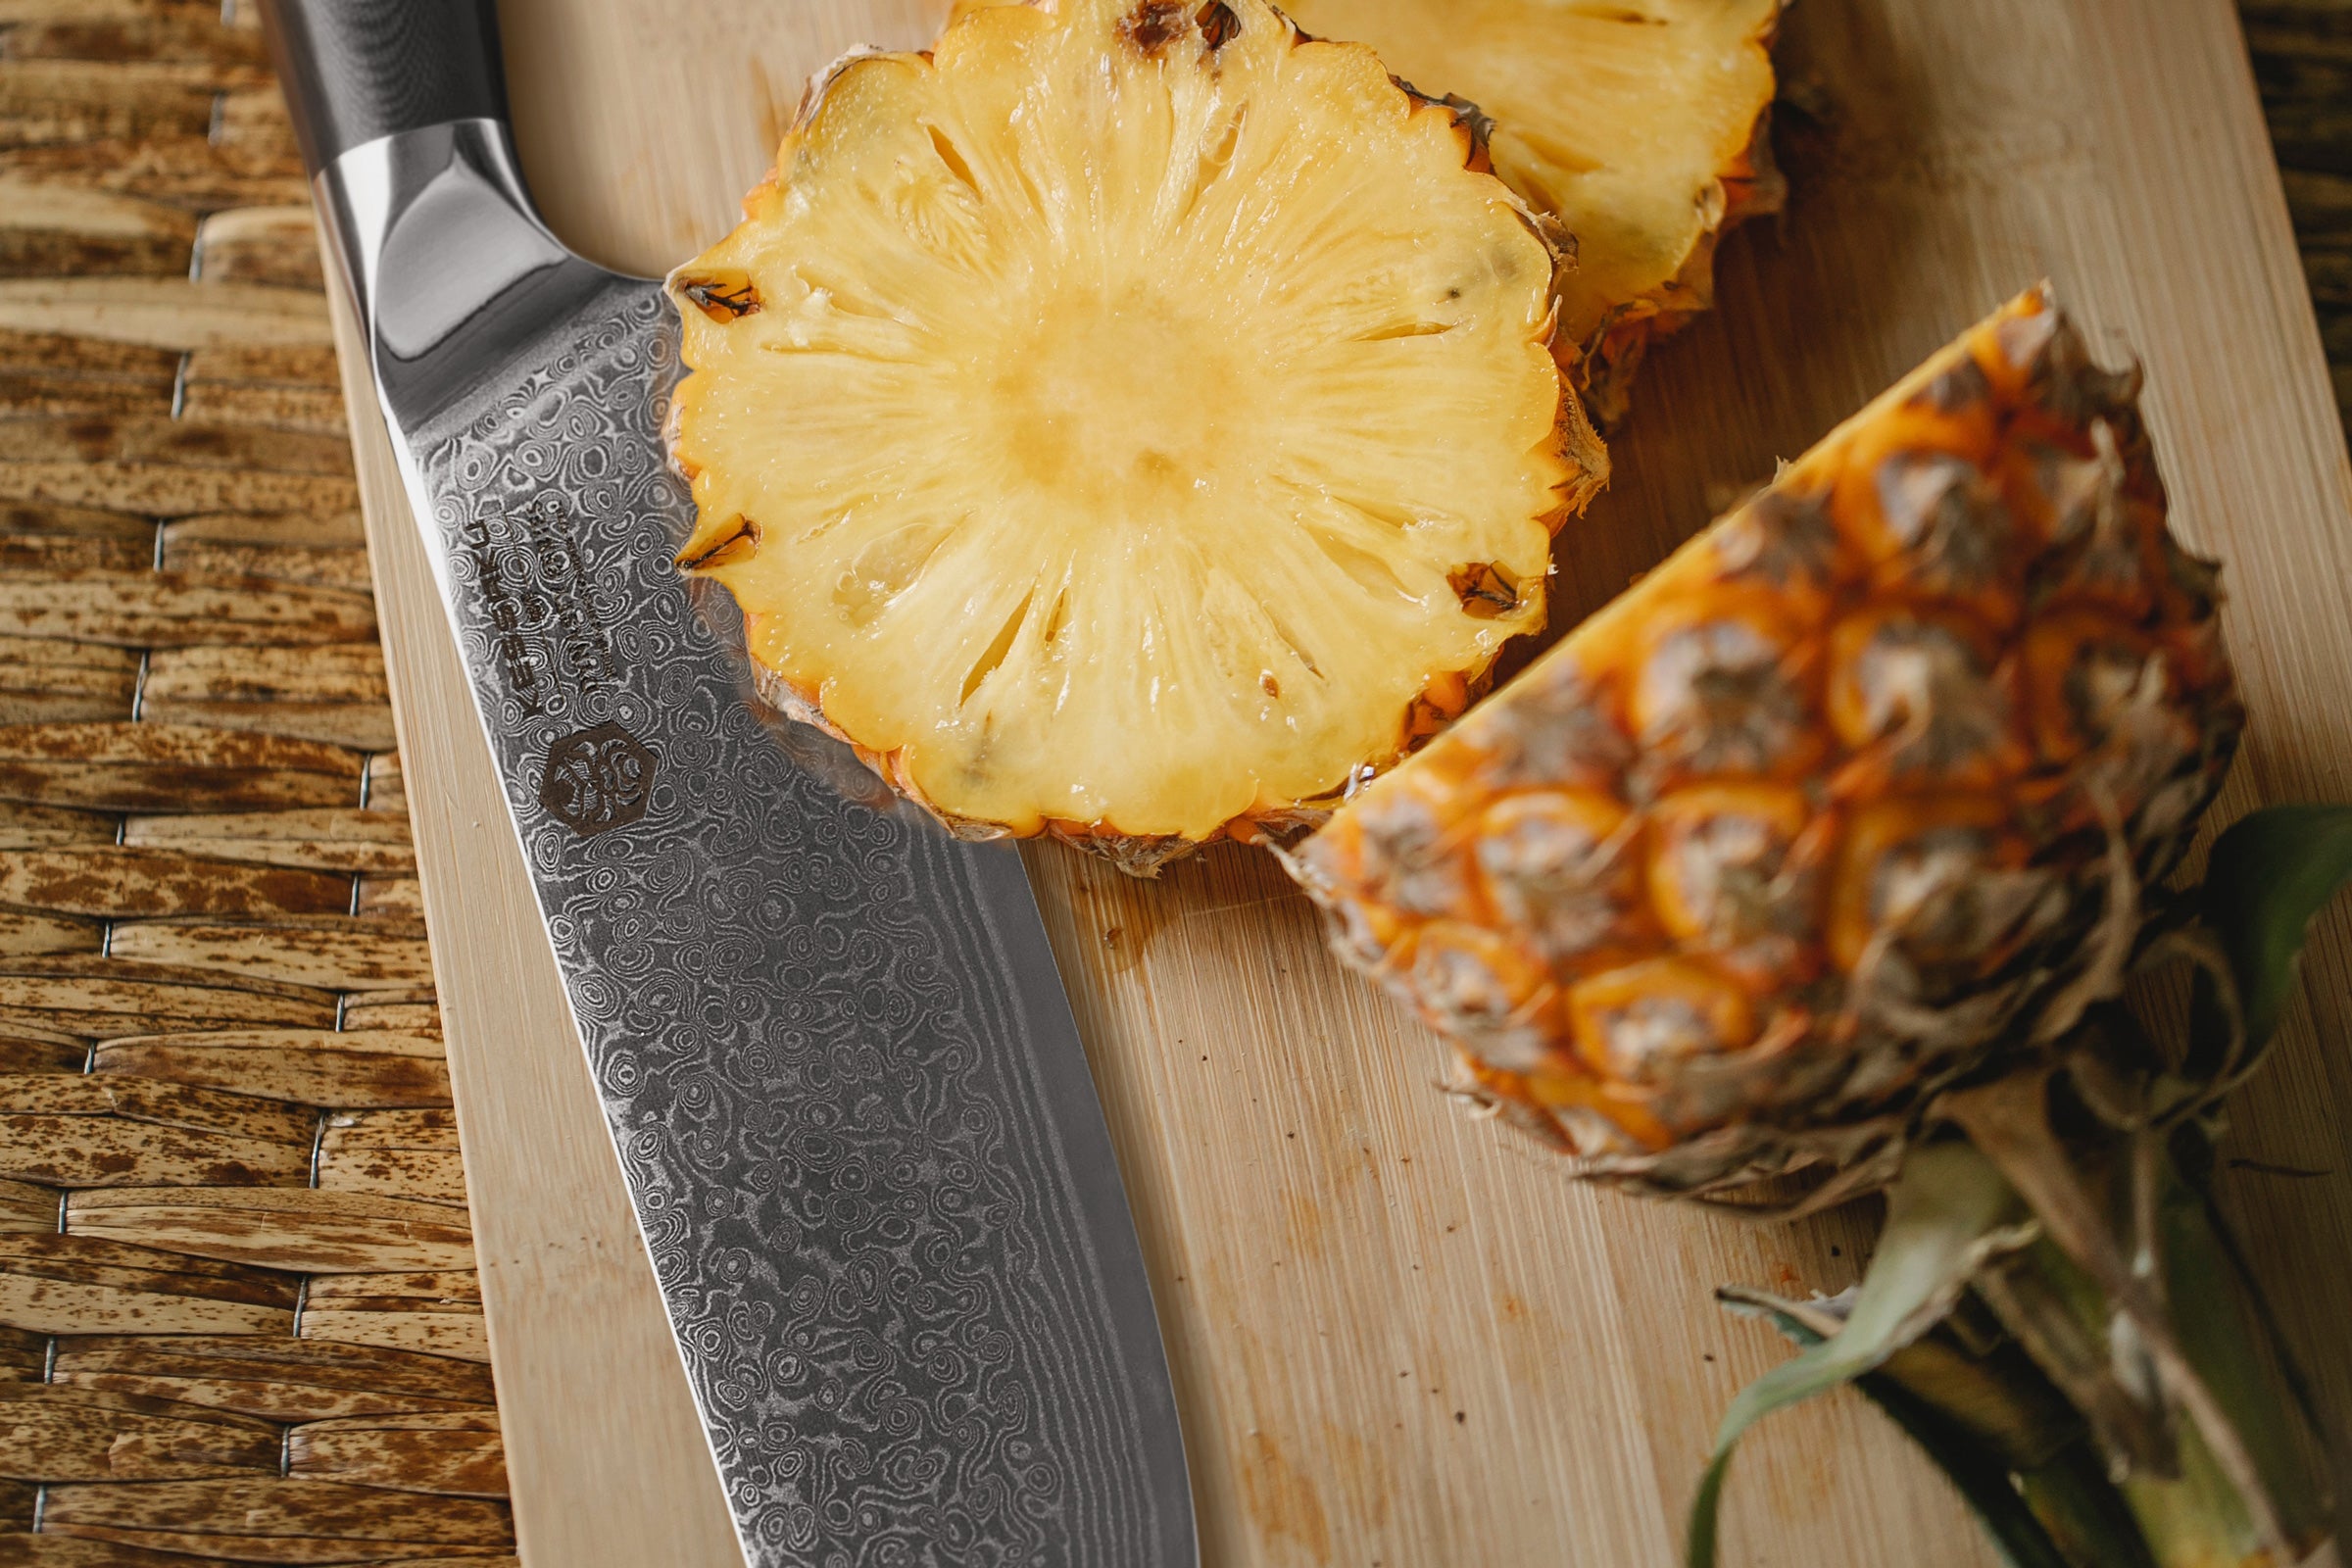 The Dynasty Damascus Nakiri with thick slices of pineapple.